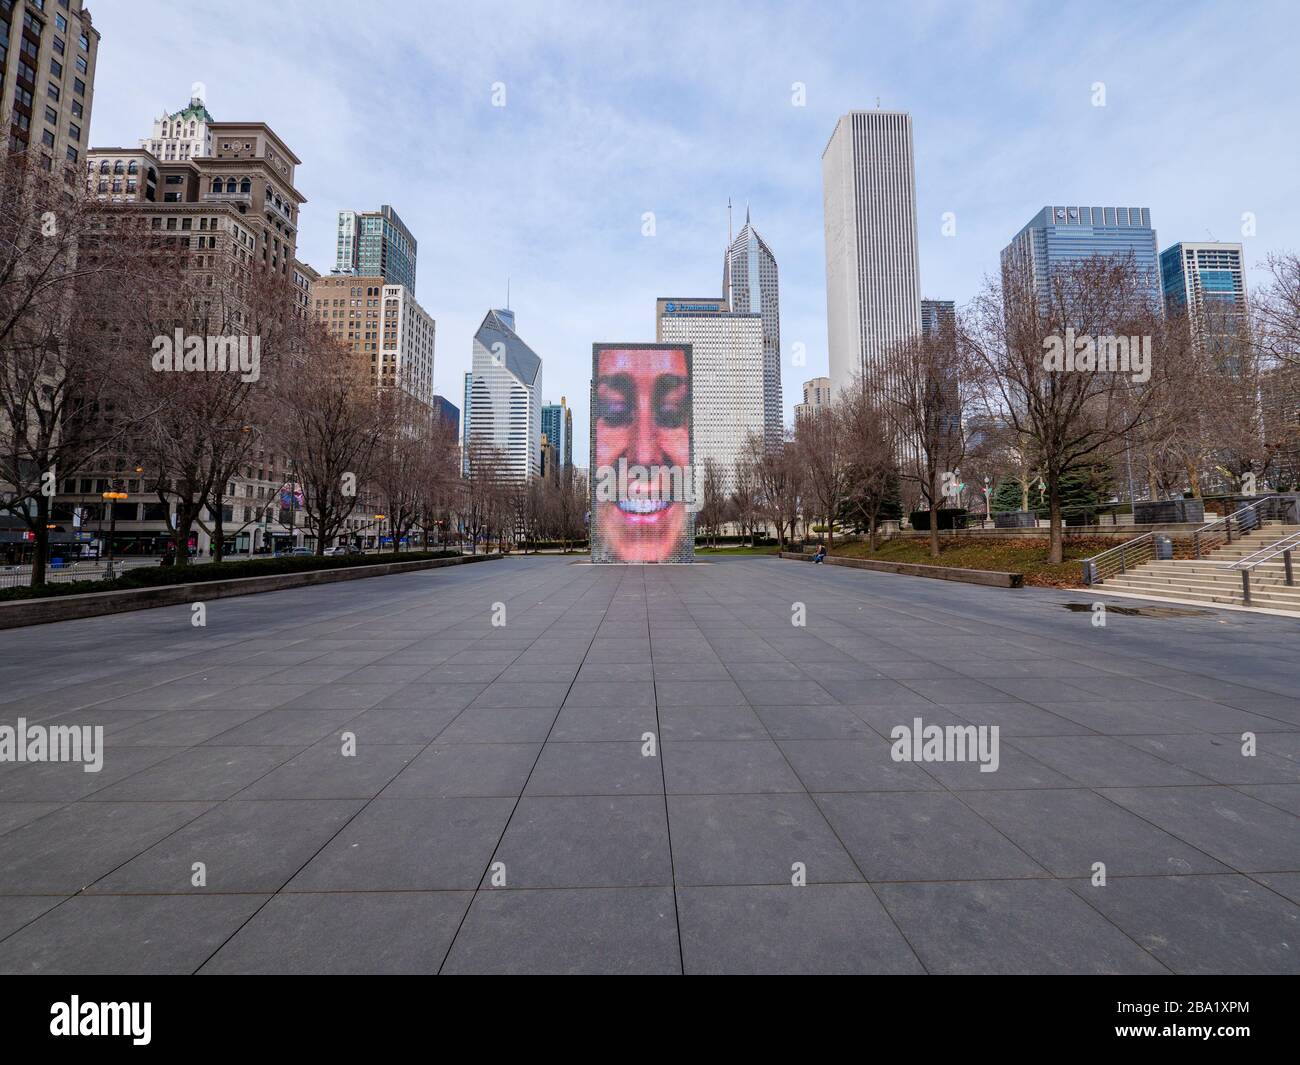 Chicago, Illinois, USA. 24th March 2020. Crown Fountain in Millennium Park, which usually attracts many people is empty today do to the stay at home order in effect. Stock Photo